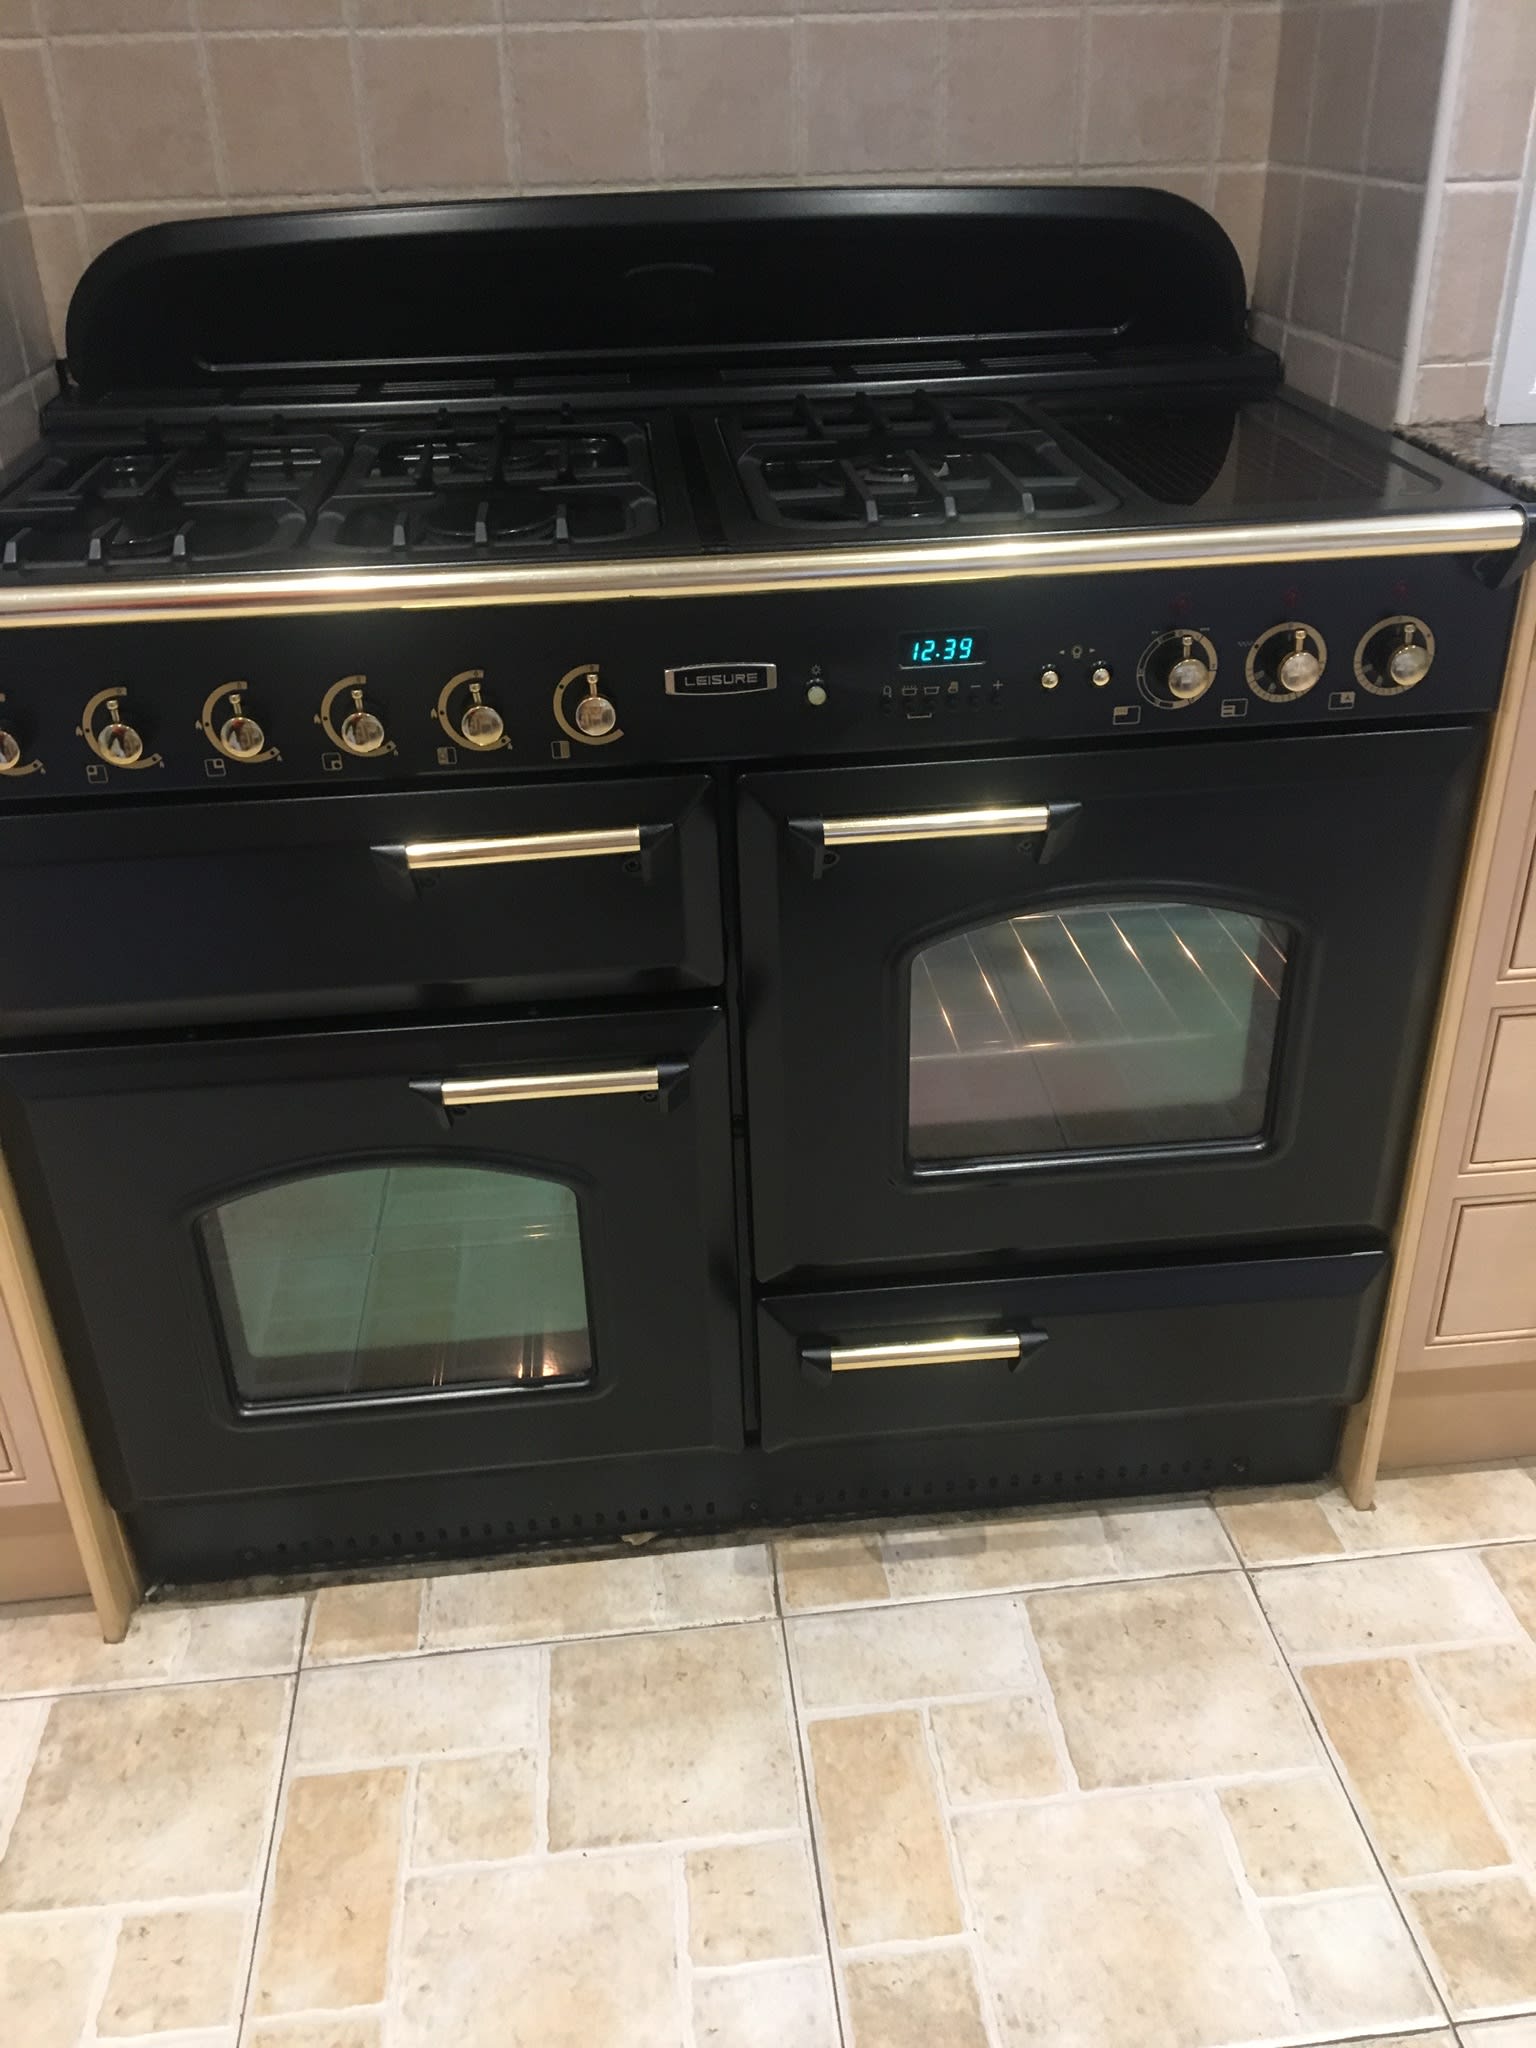 Oven Cleaning Range Oven Domestic Cleaning Services